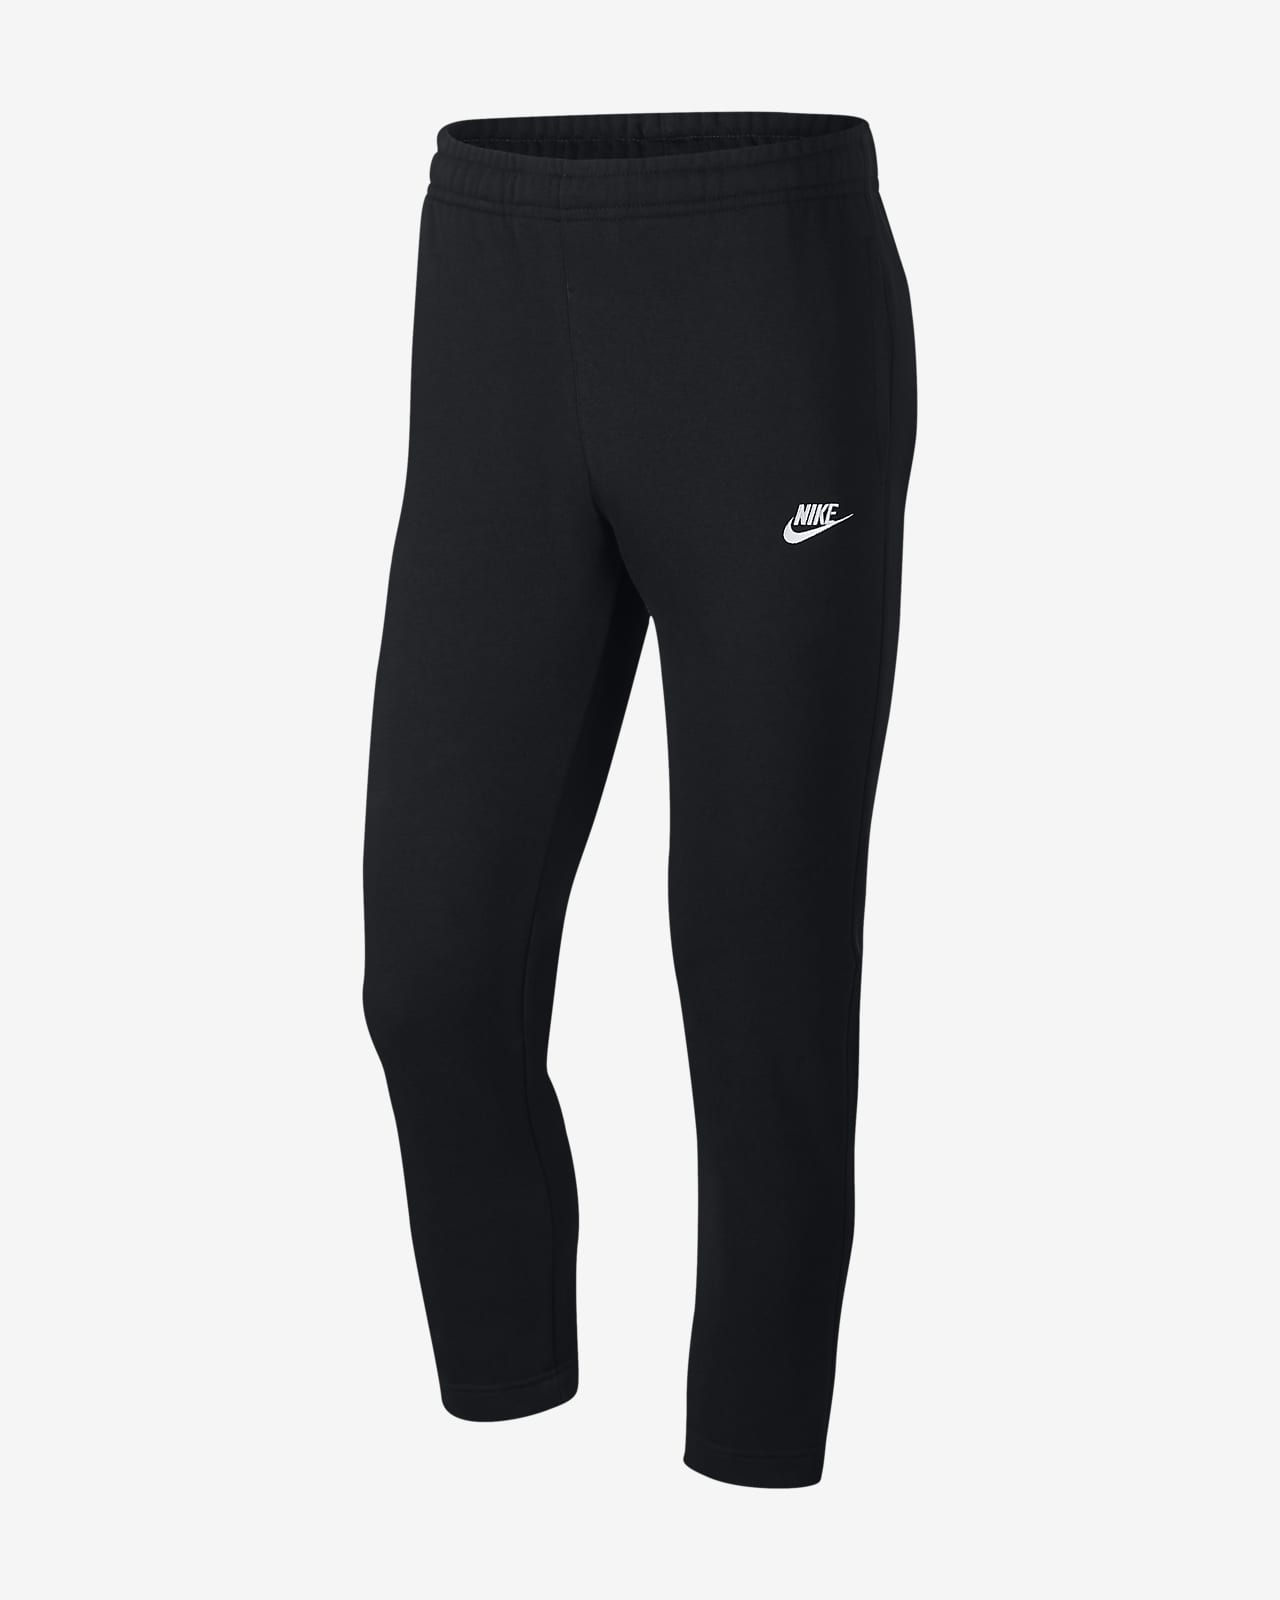 Nike Sportswear French Terry Pants Review 